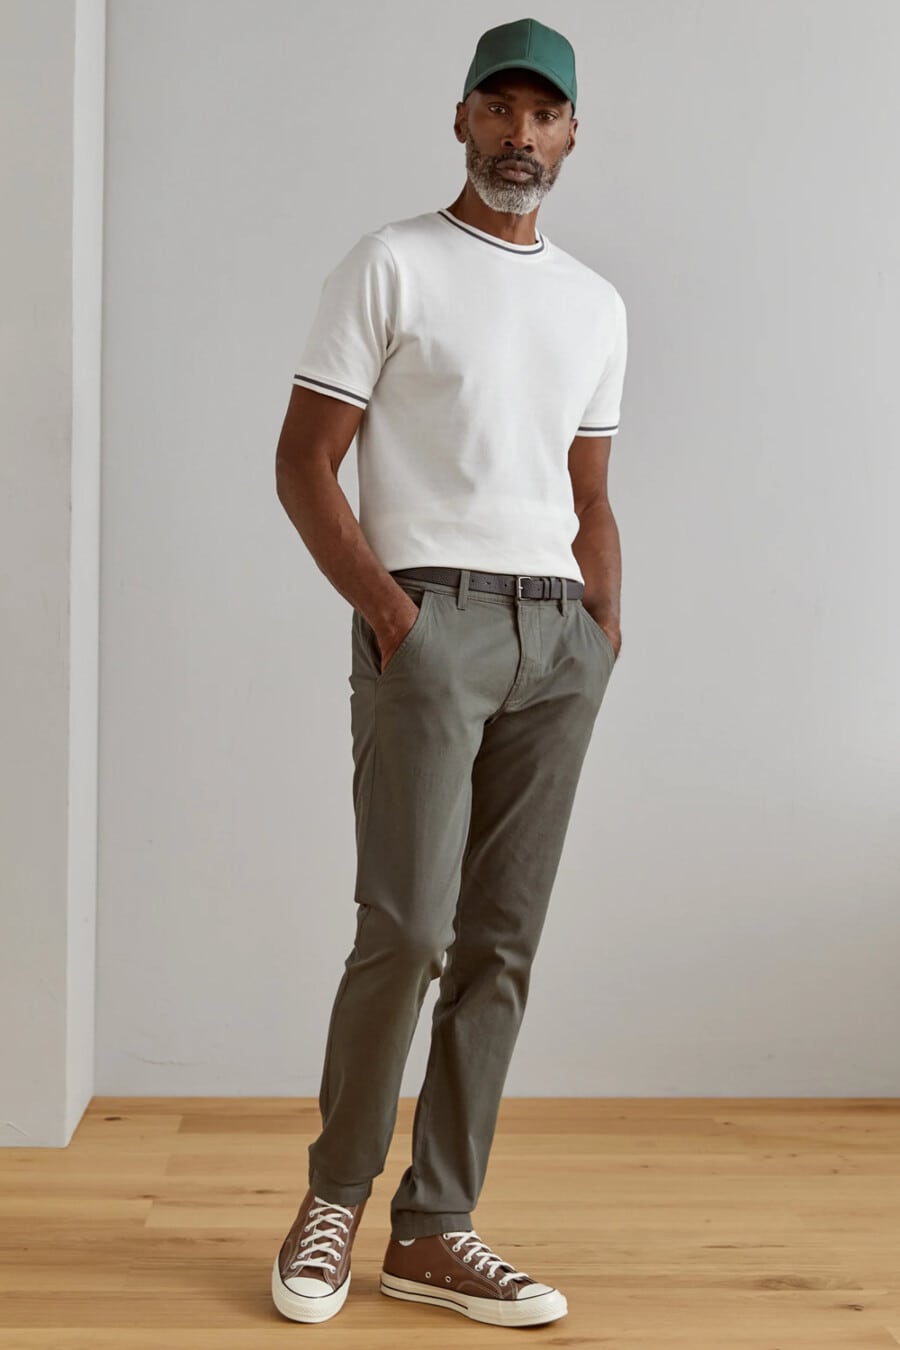 Men's mid-grey pants, white knitted T-shirt, green baseball cap and brown canvas high-top sneakers outfit